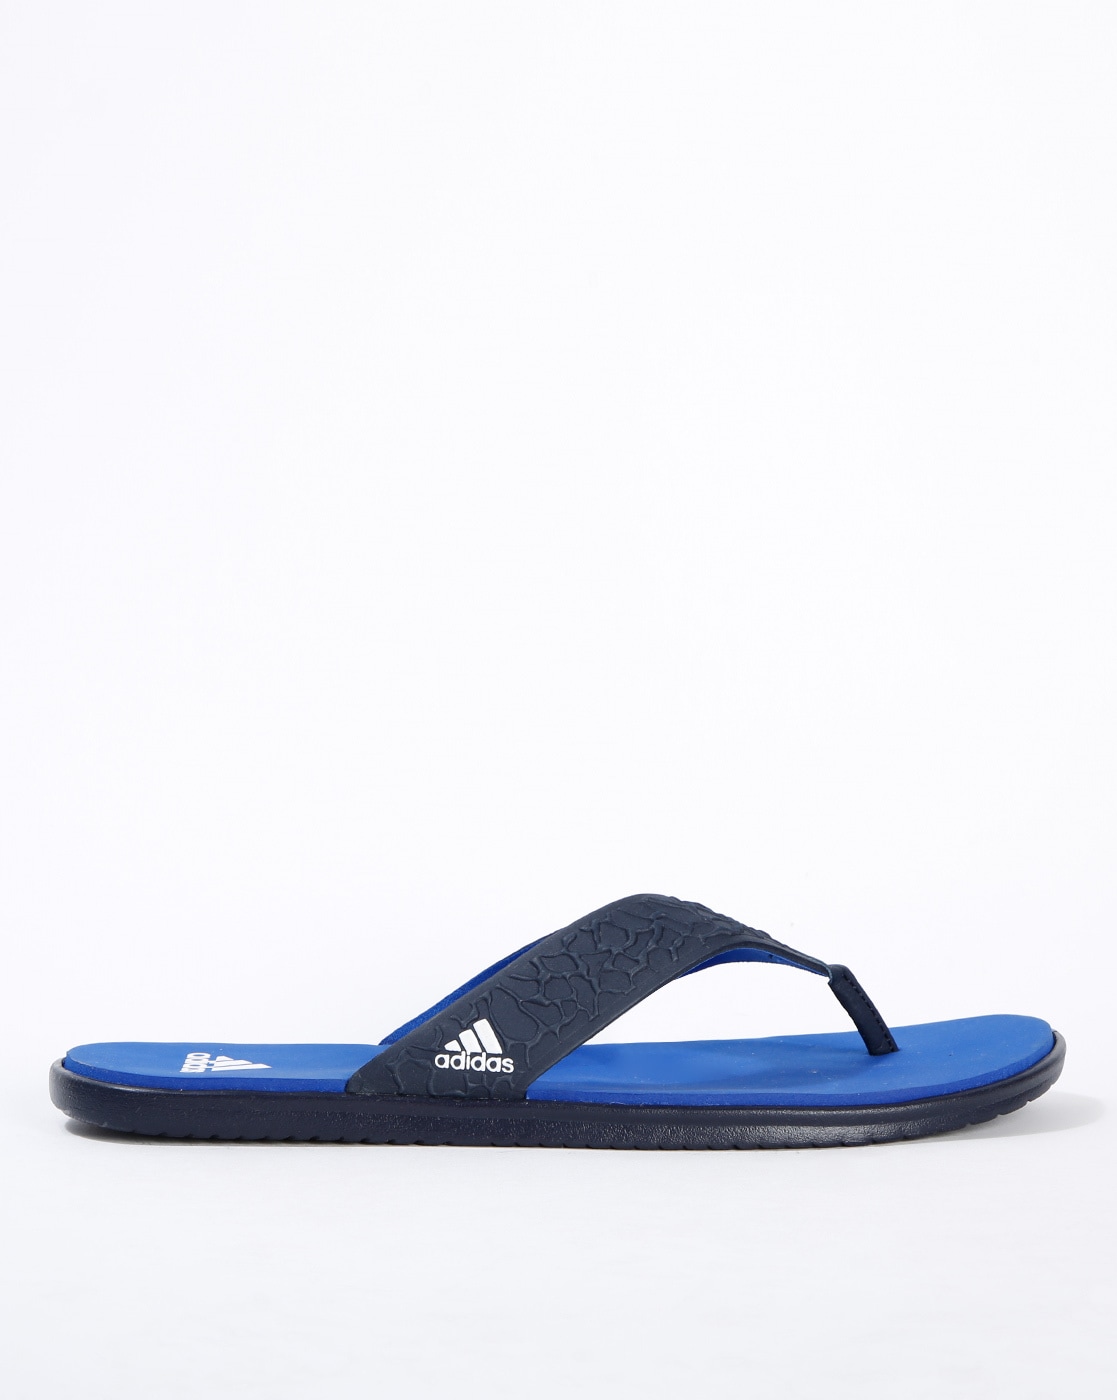 adidas strap slippers